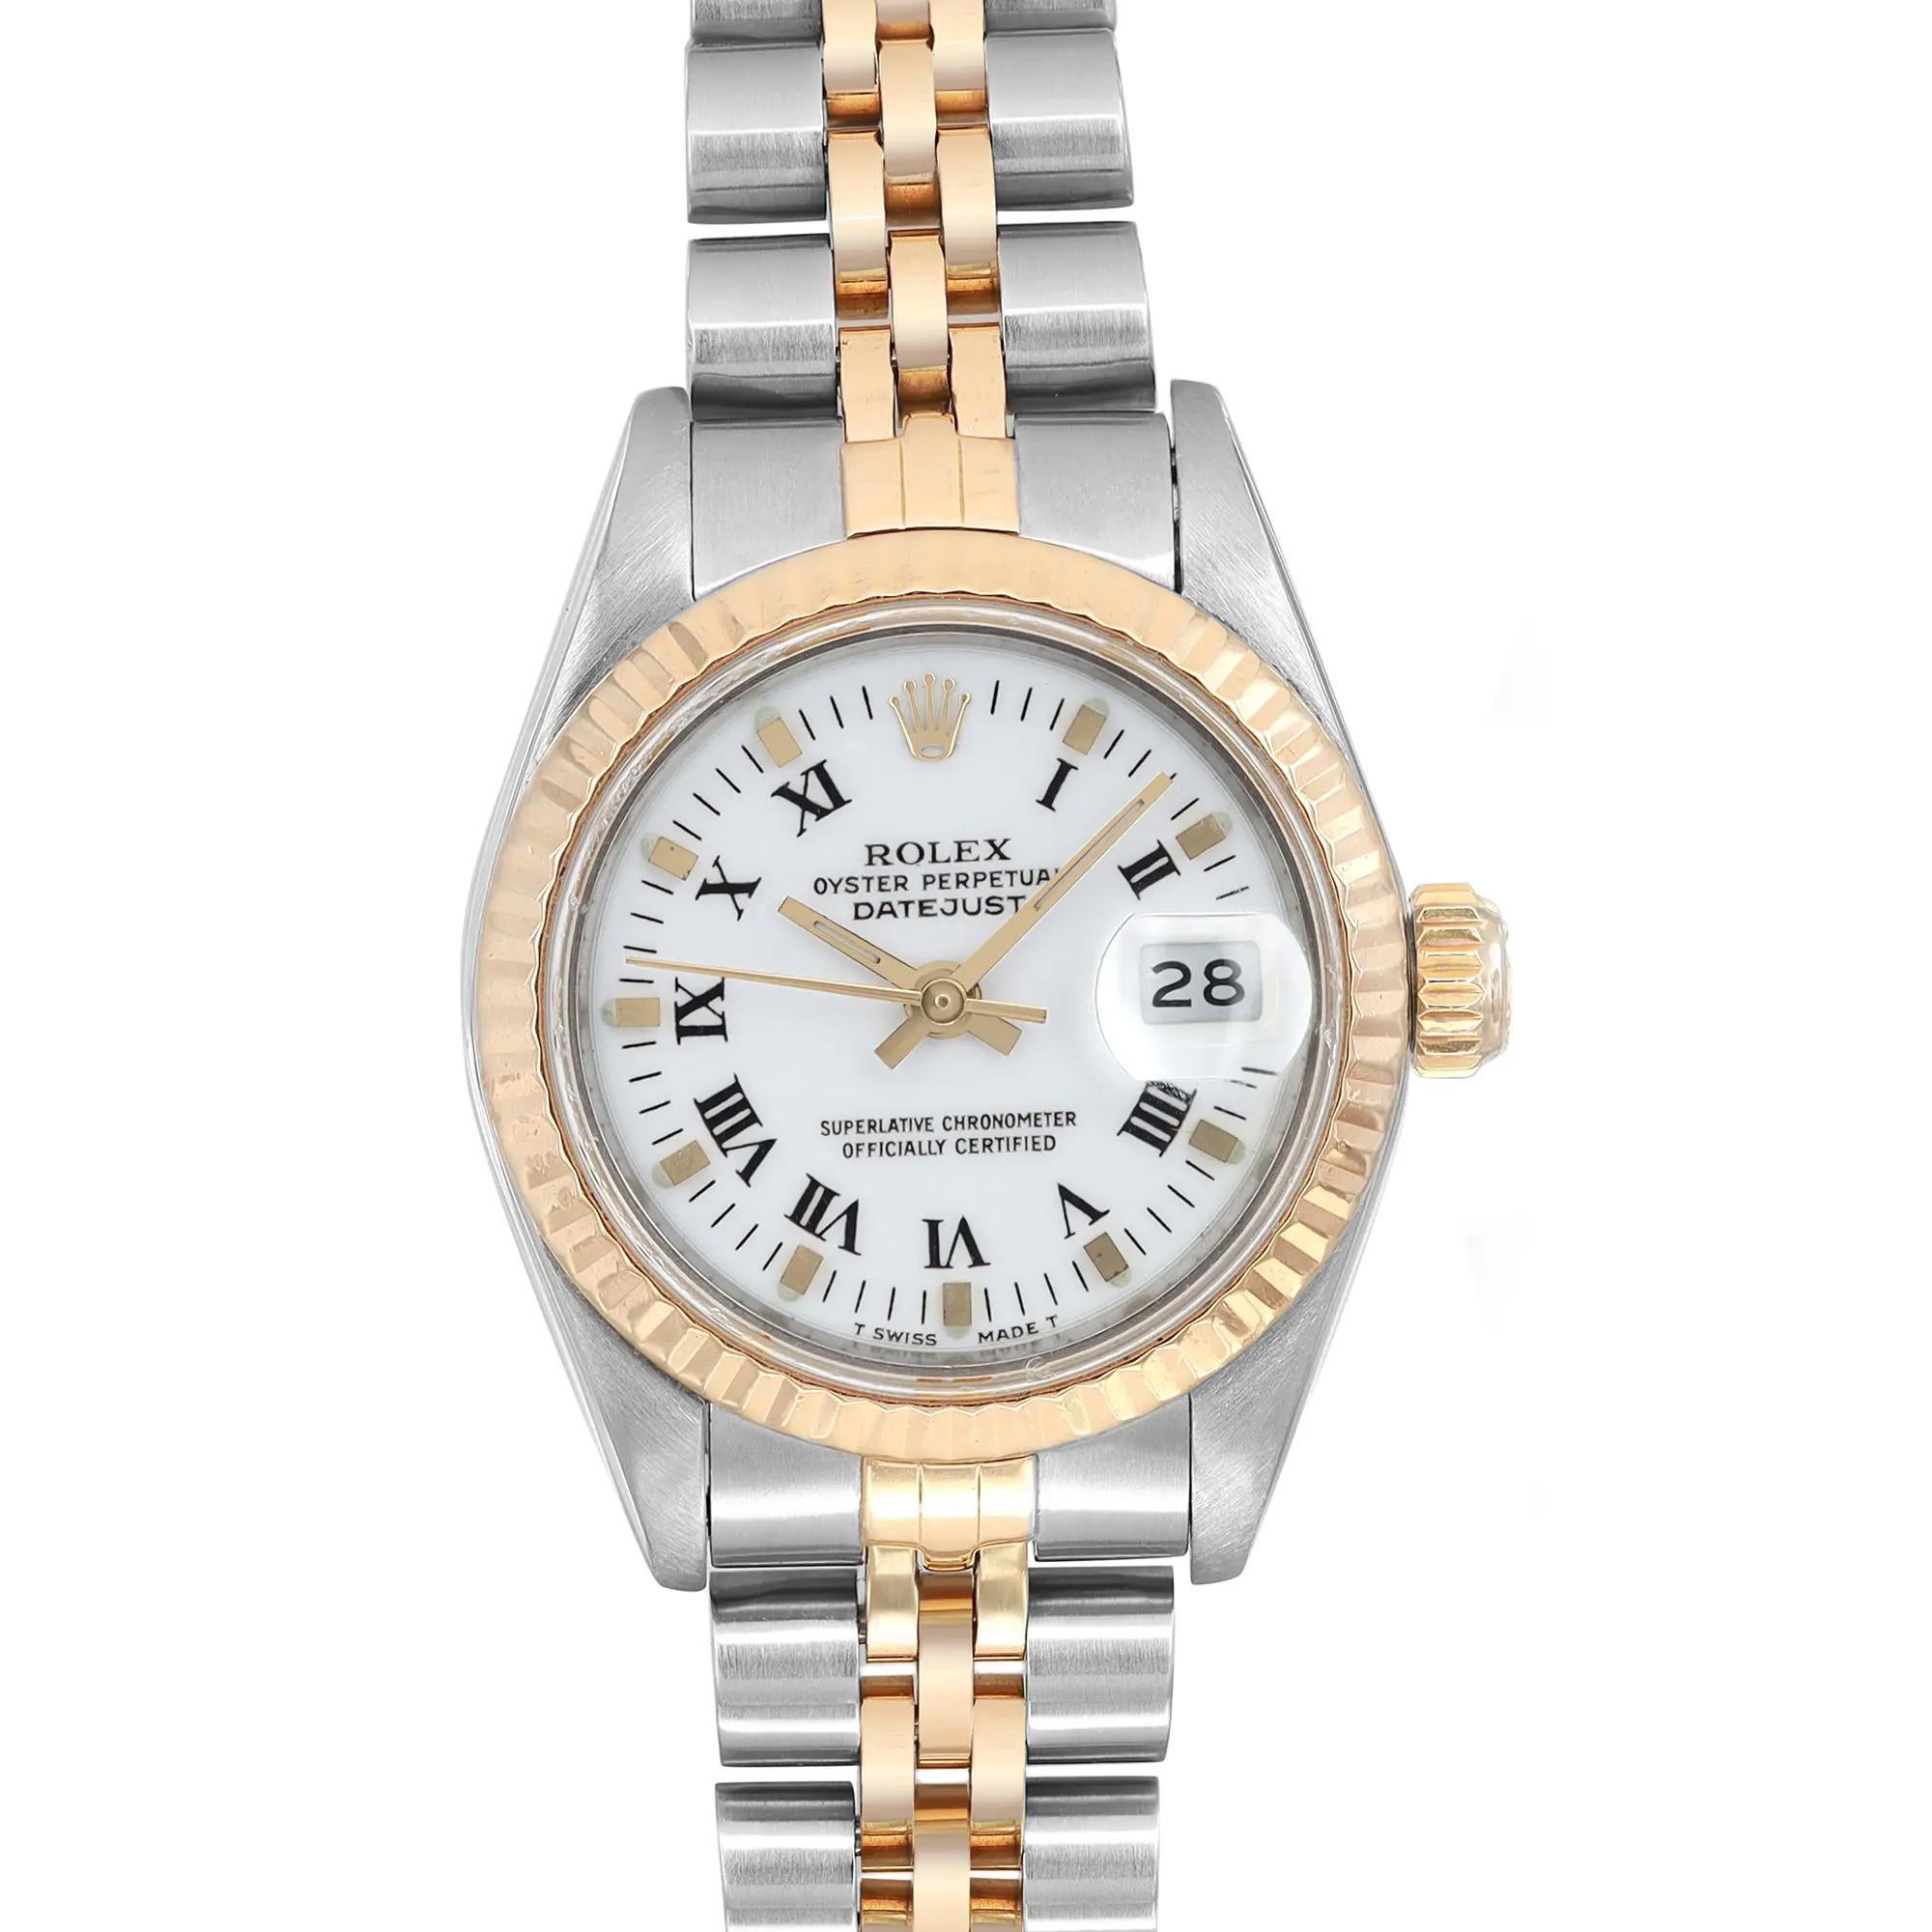 Pre-owned in good condition. The bracelet shows Moderate slack. Wrist size 6.5 inches.

 Brand: Rolex  Type: Wristwatch  Department: Women  Model Number: 69173  Country/Region of Manufacture: Switzerland  Style: Dress/Formal  Model: Rolex Datejust  